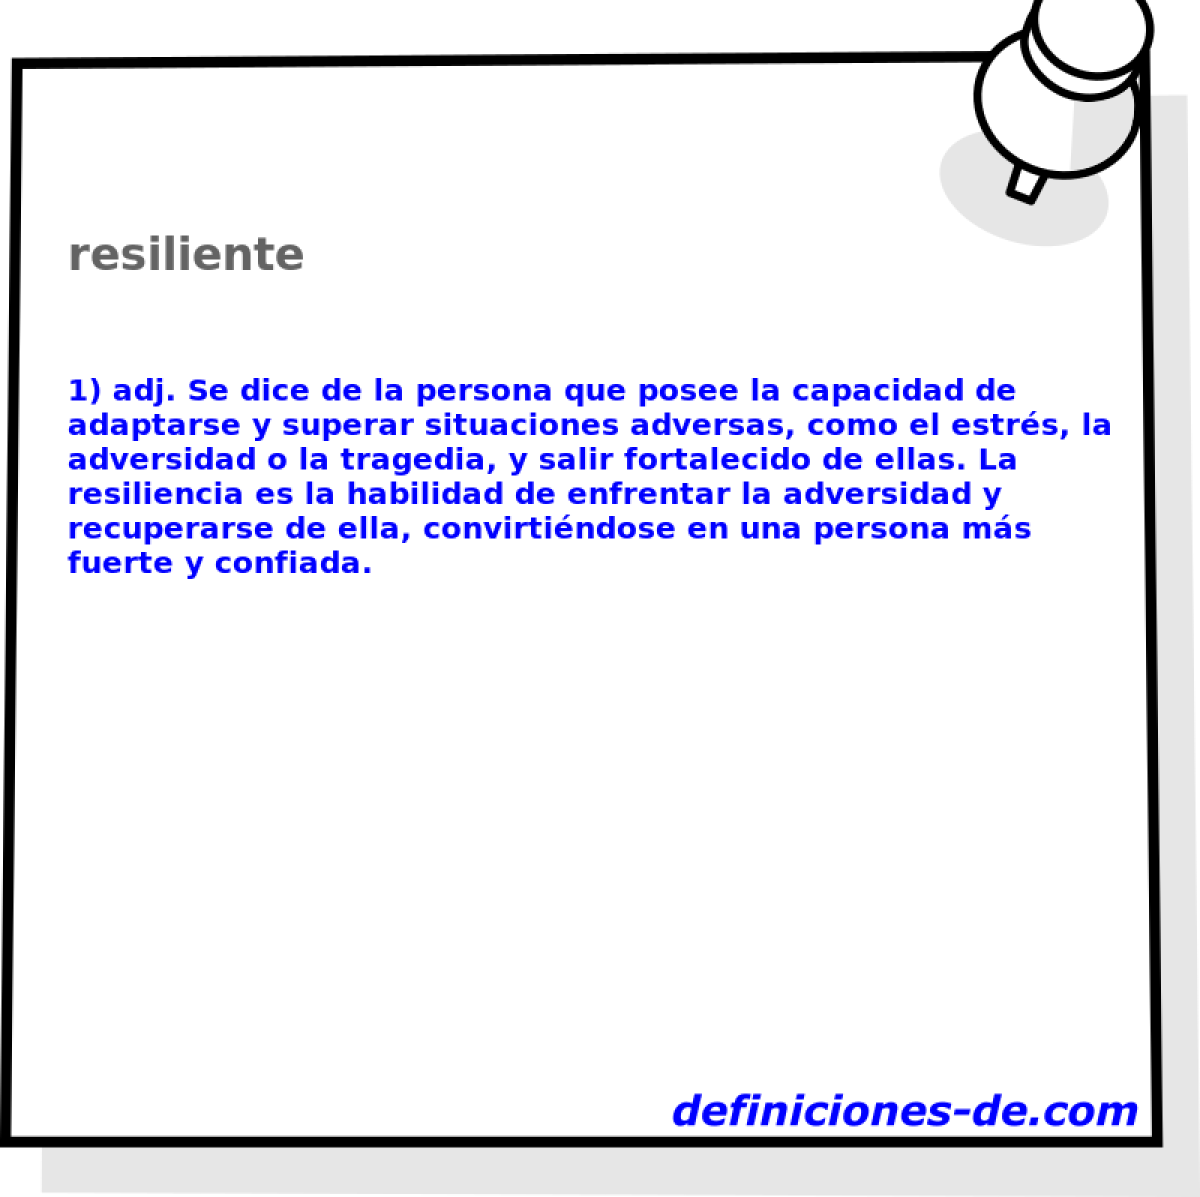 resiliente 